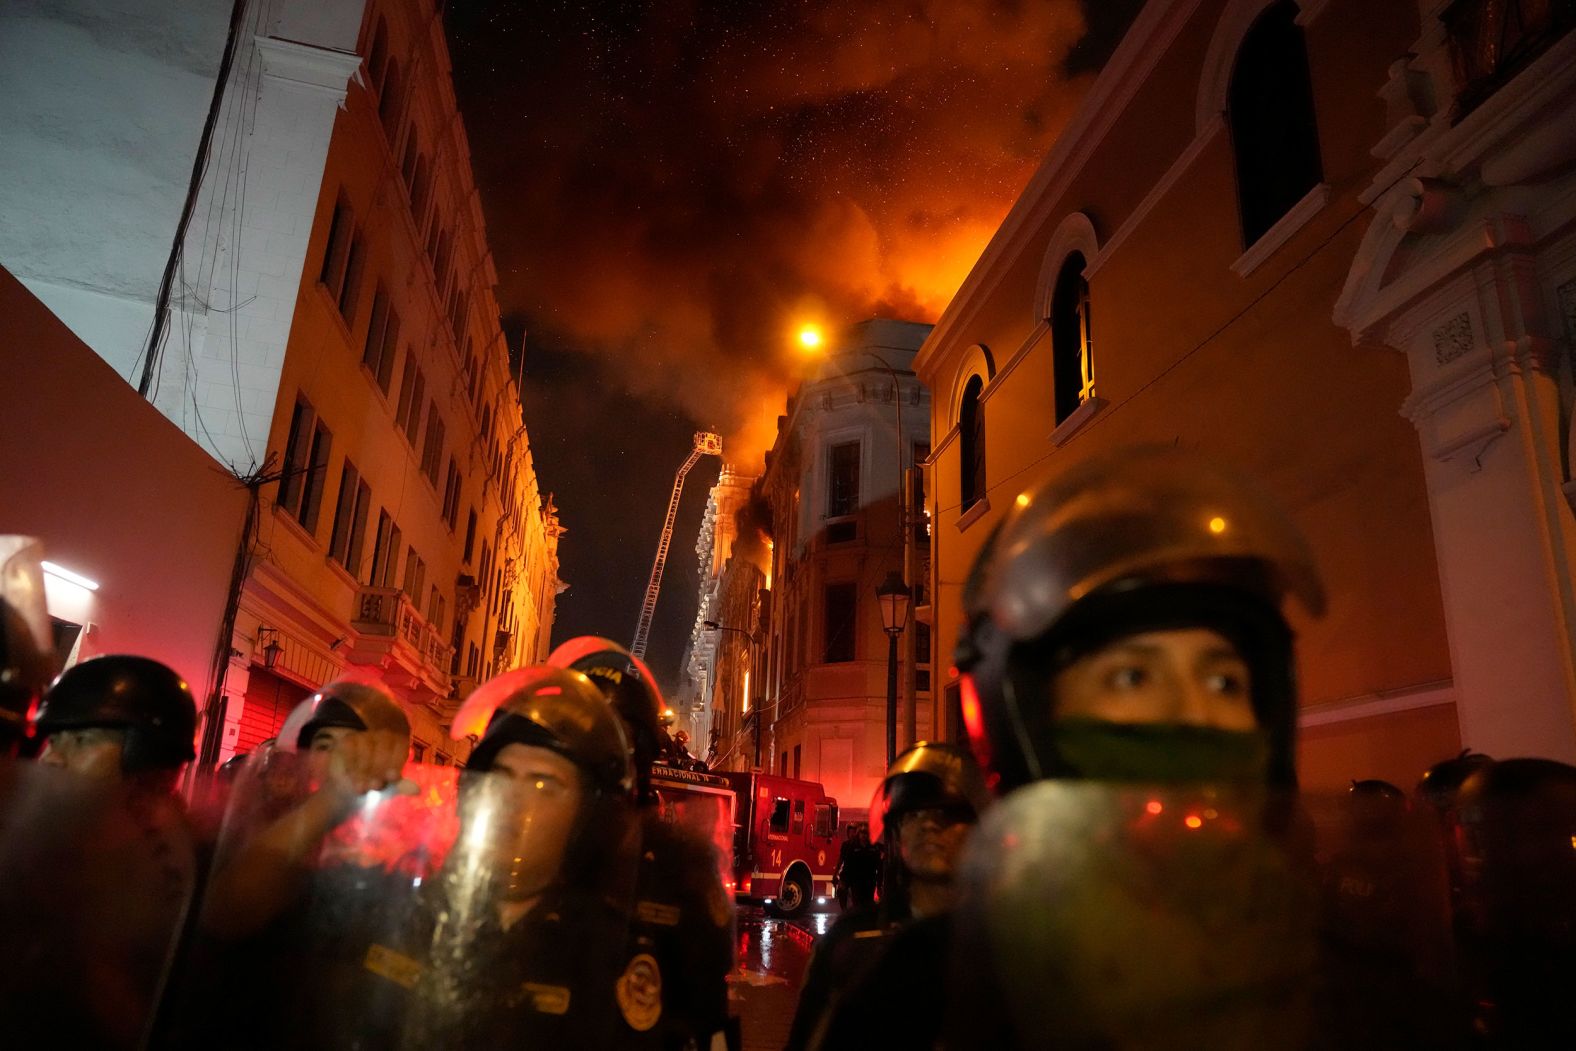 Police block a street in Lima, Peru, as a building burns behind them on Thursday, January 19. Peruvian President Dina Boluarte called for dialogue after clashes between protesters and police during nationwide demonstrations. <a href="https://www.cnn.com/2023/01/19/americas/peru-protests-thursday-intl/index.html" target="_blank">The country's weeks-long protest movement</a> — which seeks a complete reset of the government — was sparked by the ouster of former President Pedro Castillo in December and fueled by deep dissatisfaction over living conditions and inequality in the country.